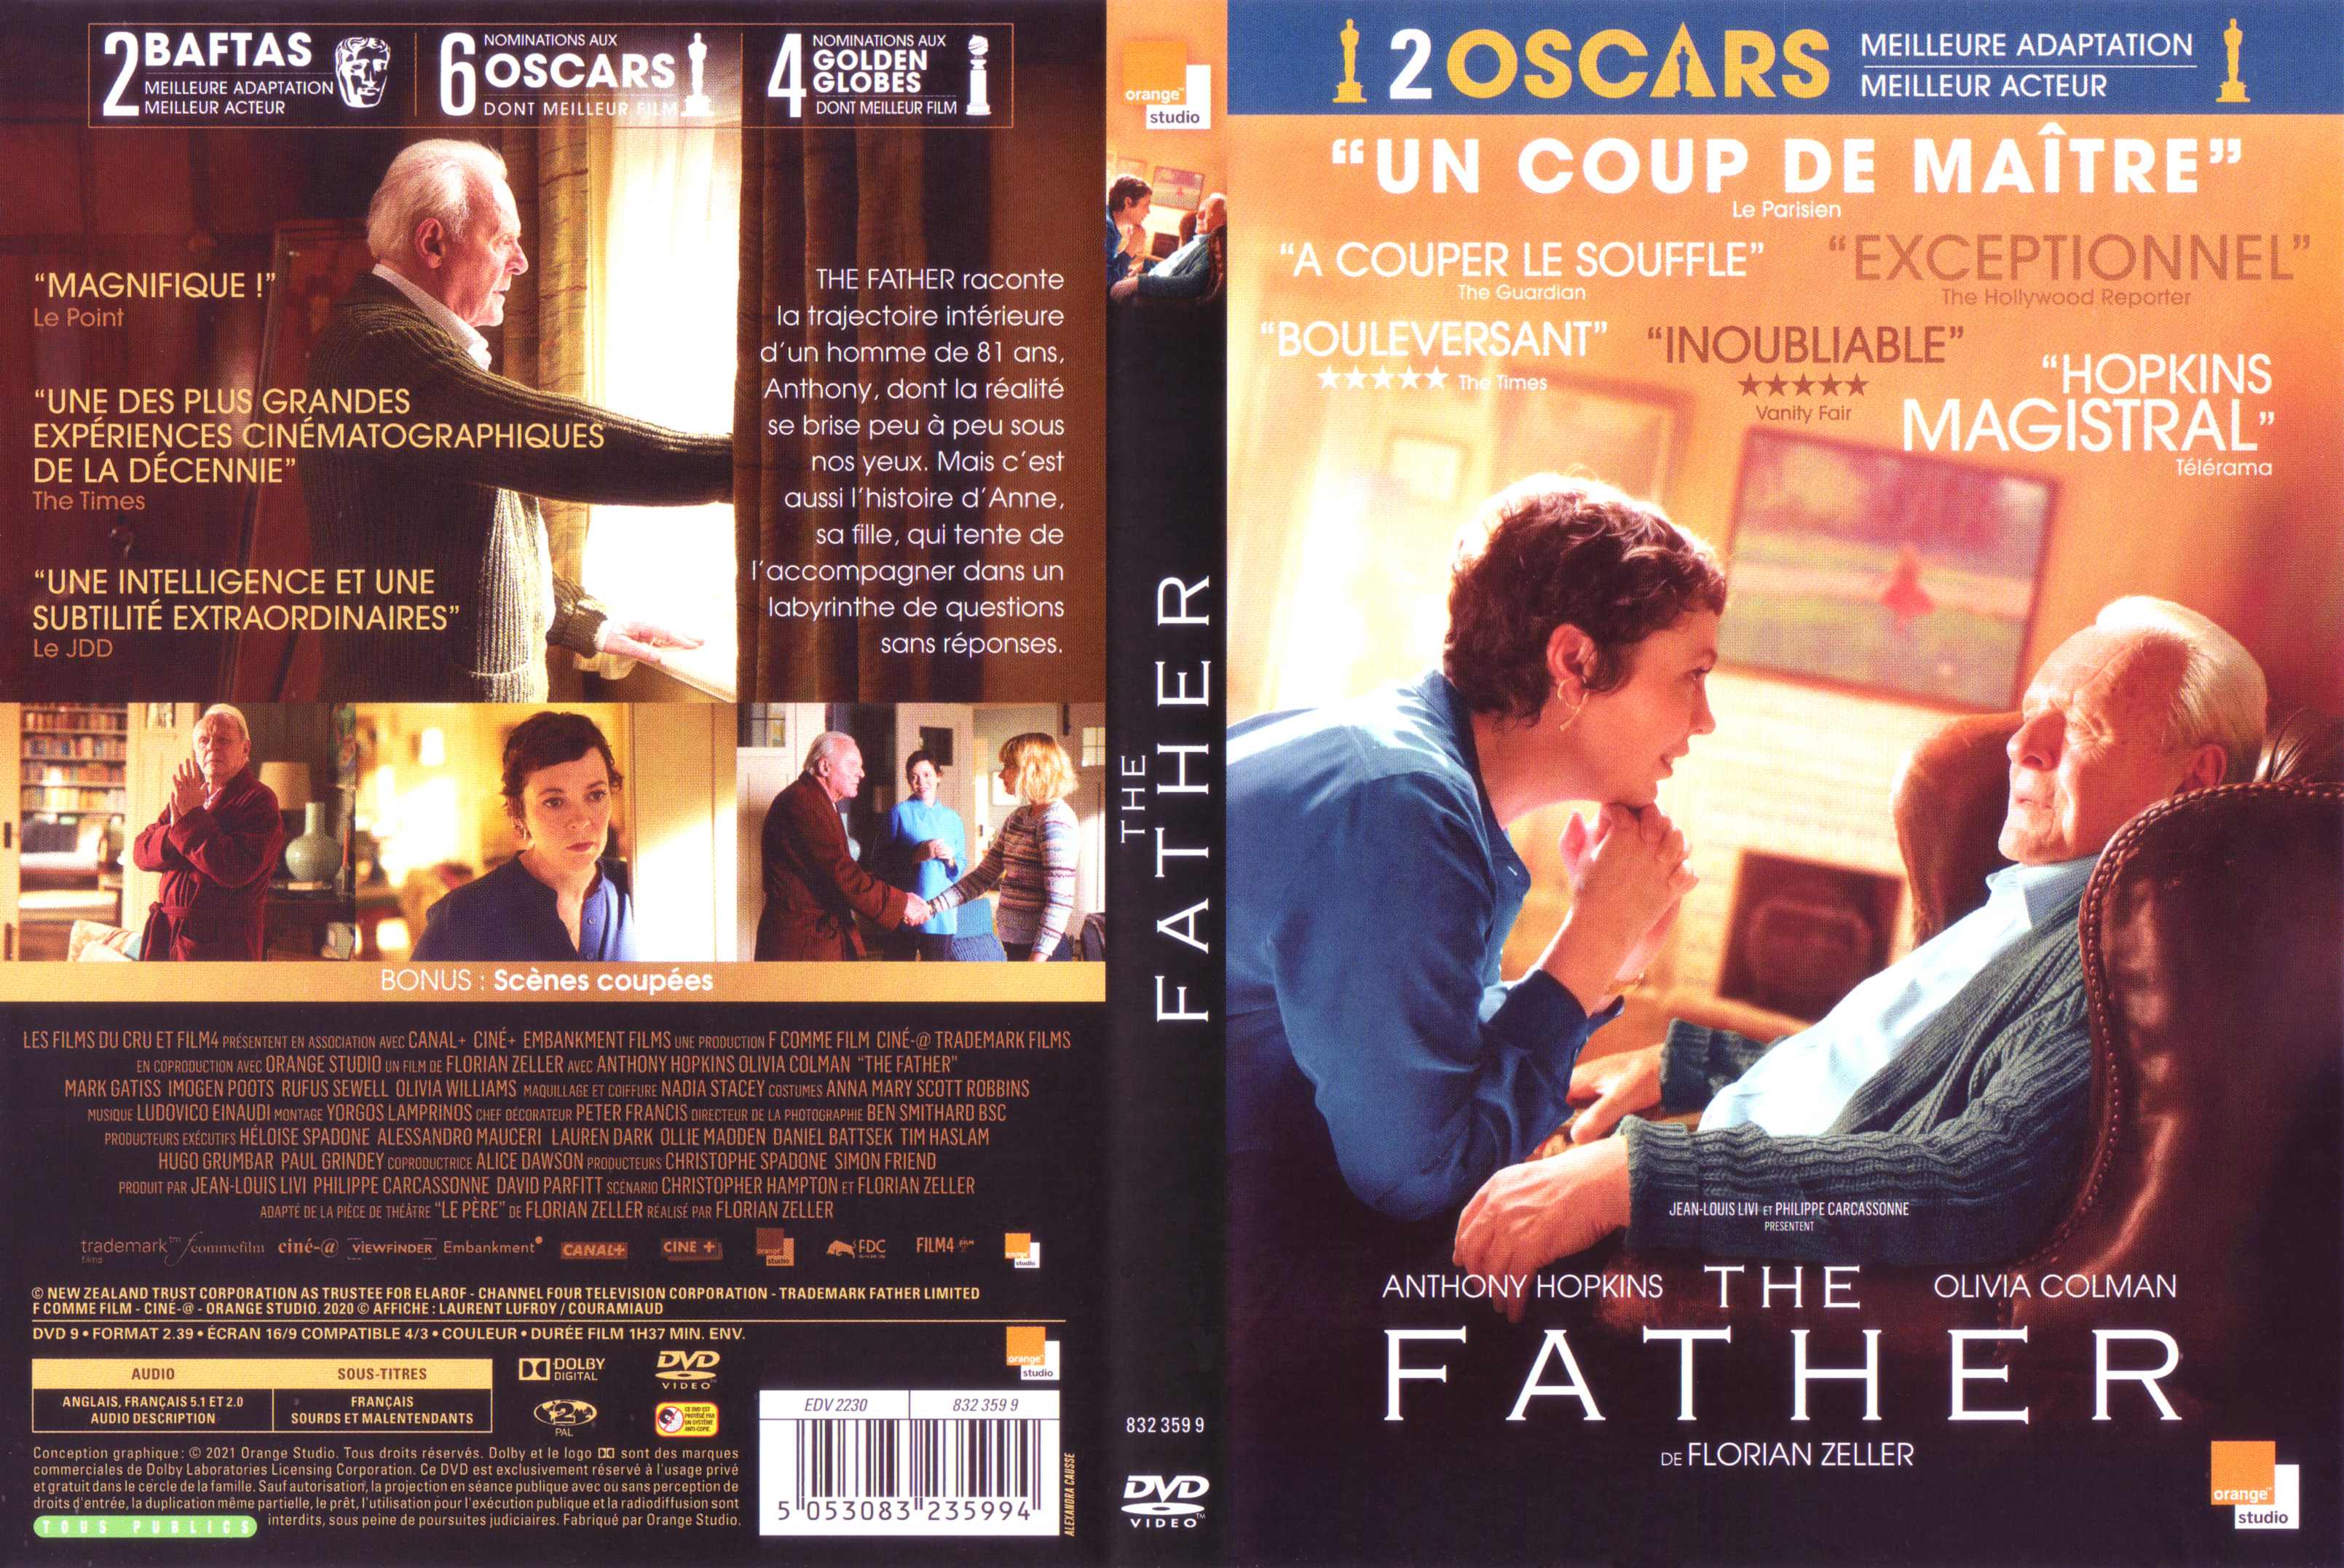 Jaquette DVD The father